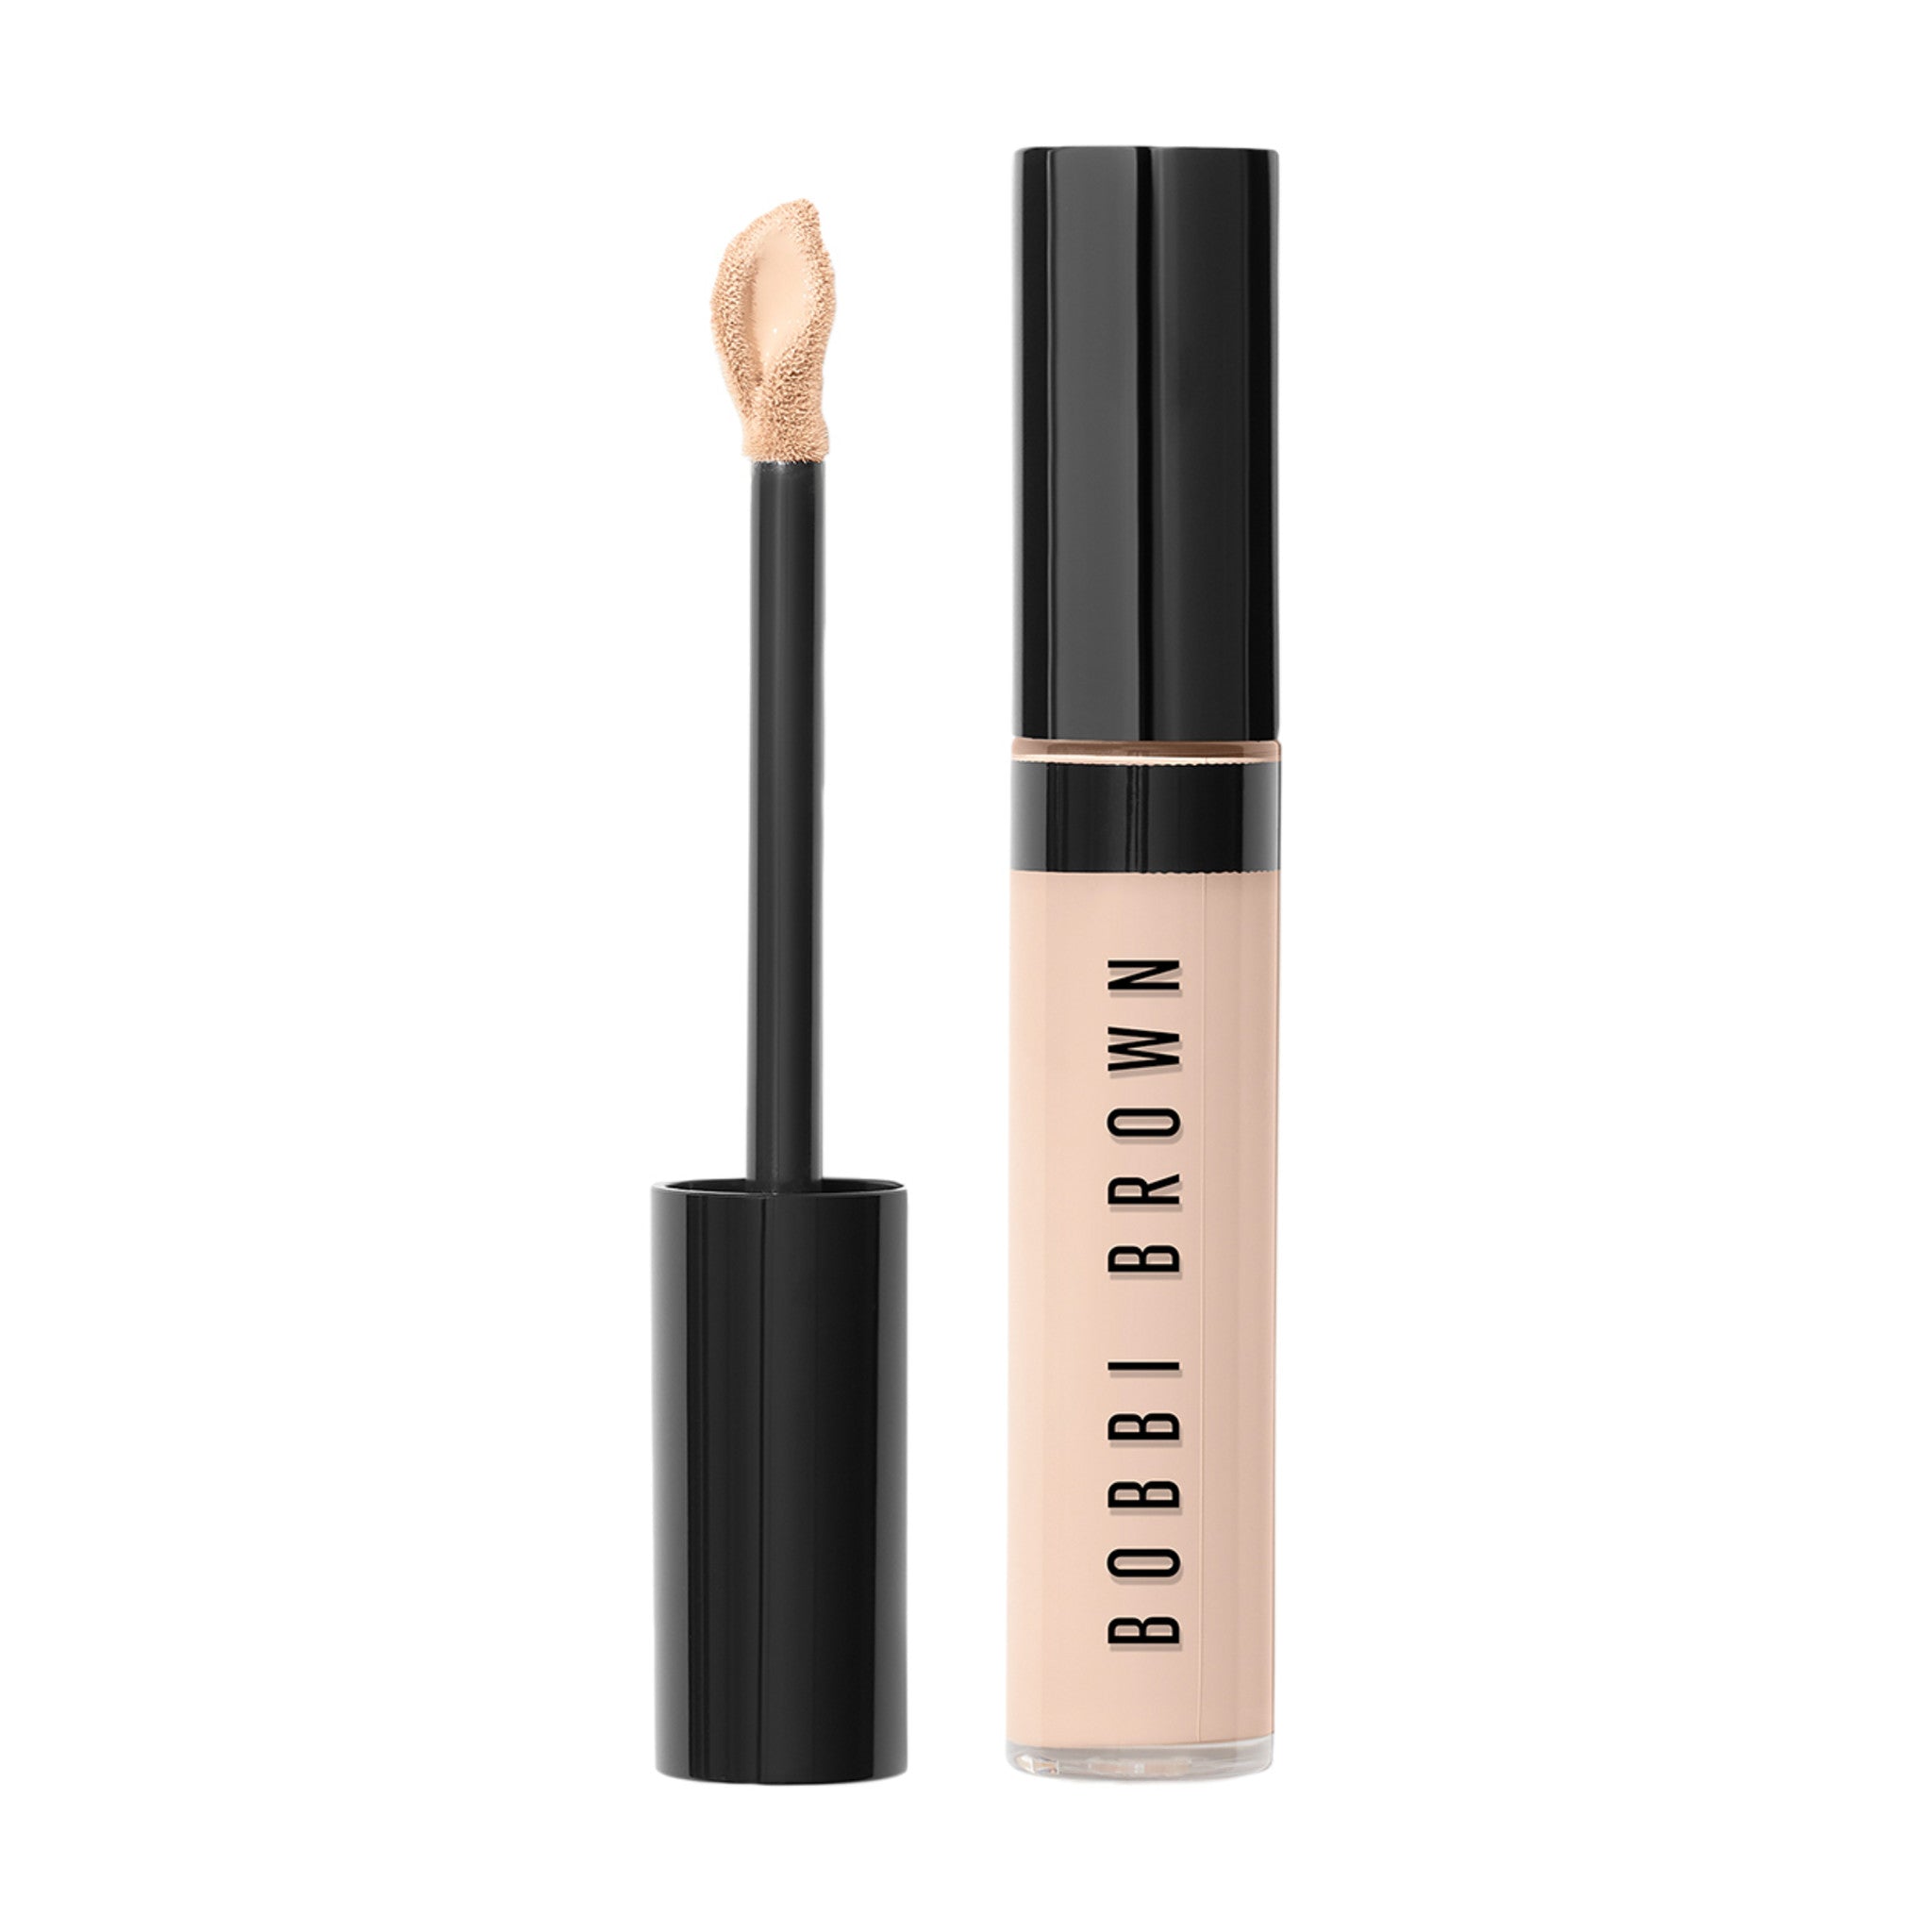 Bobbi Brown Skin Full Cover Concealer Color/Shade variant: Porcelain main image. This product is for light complexions